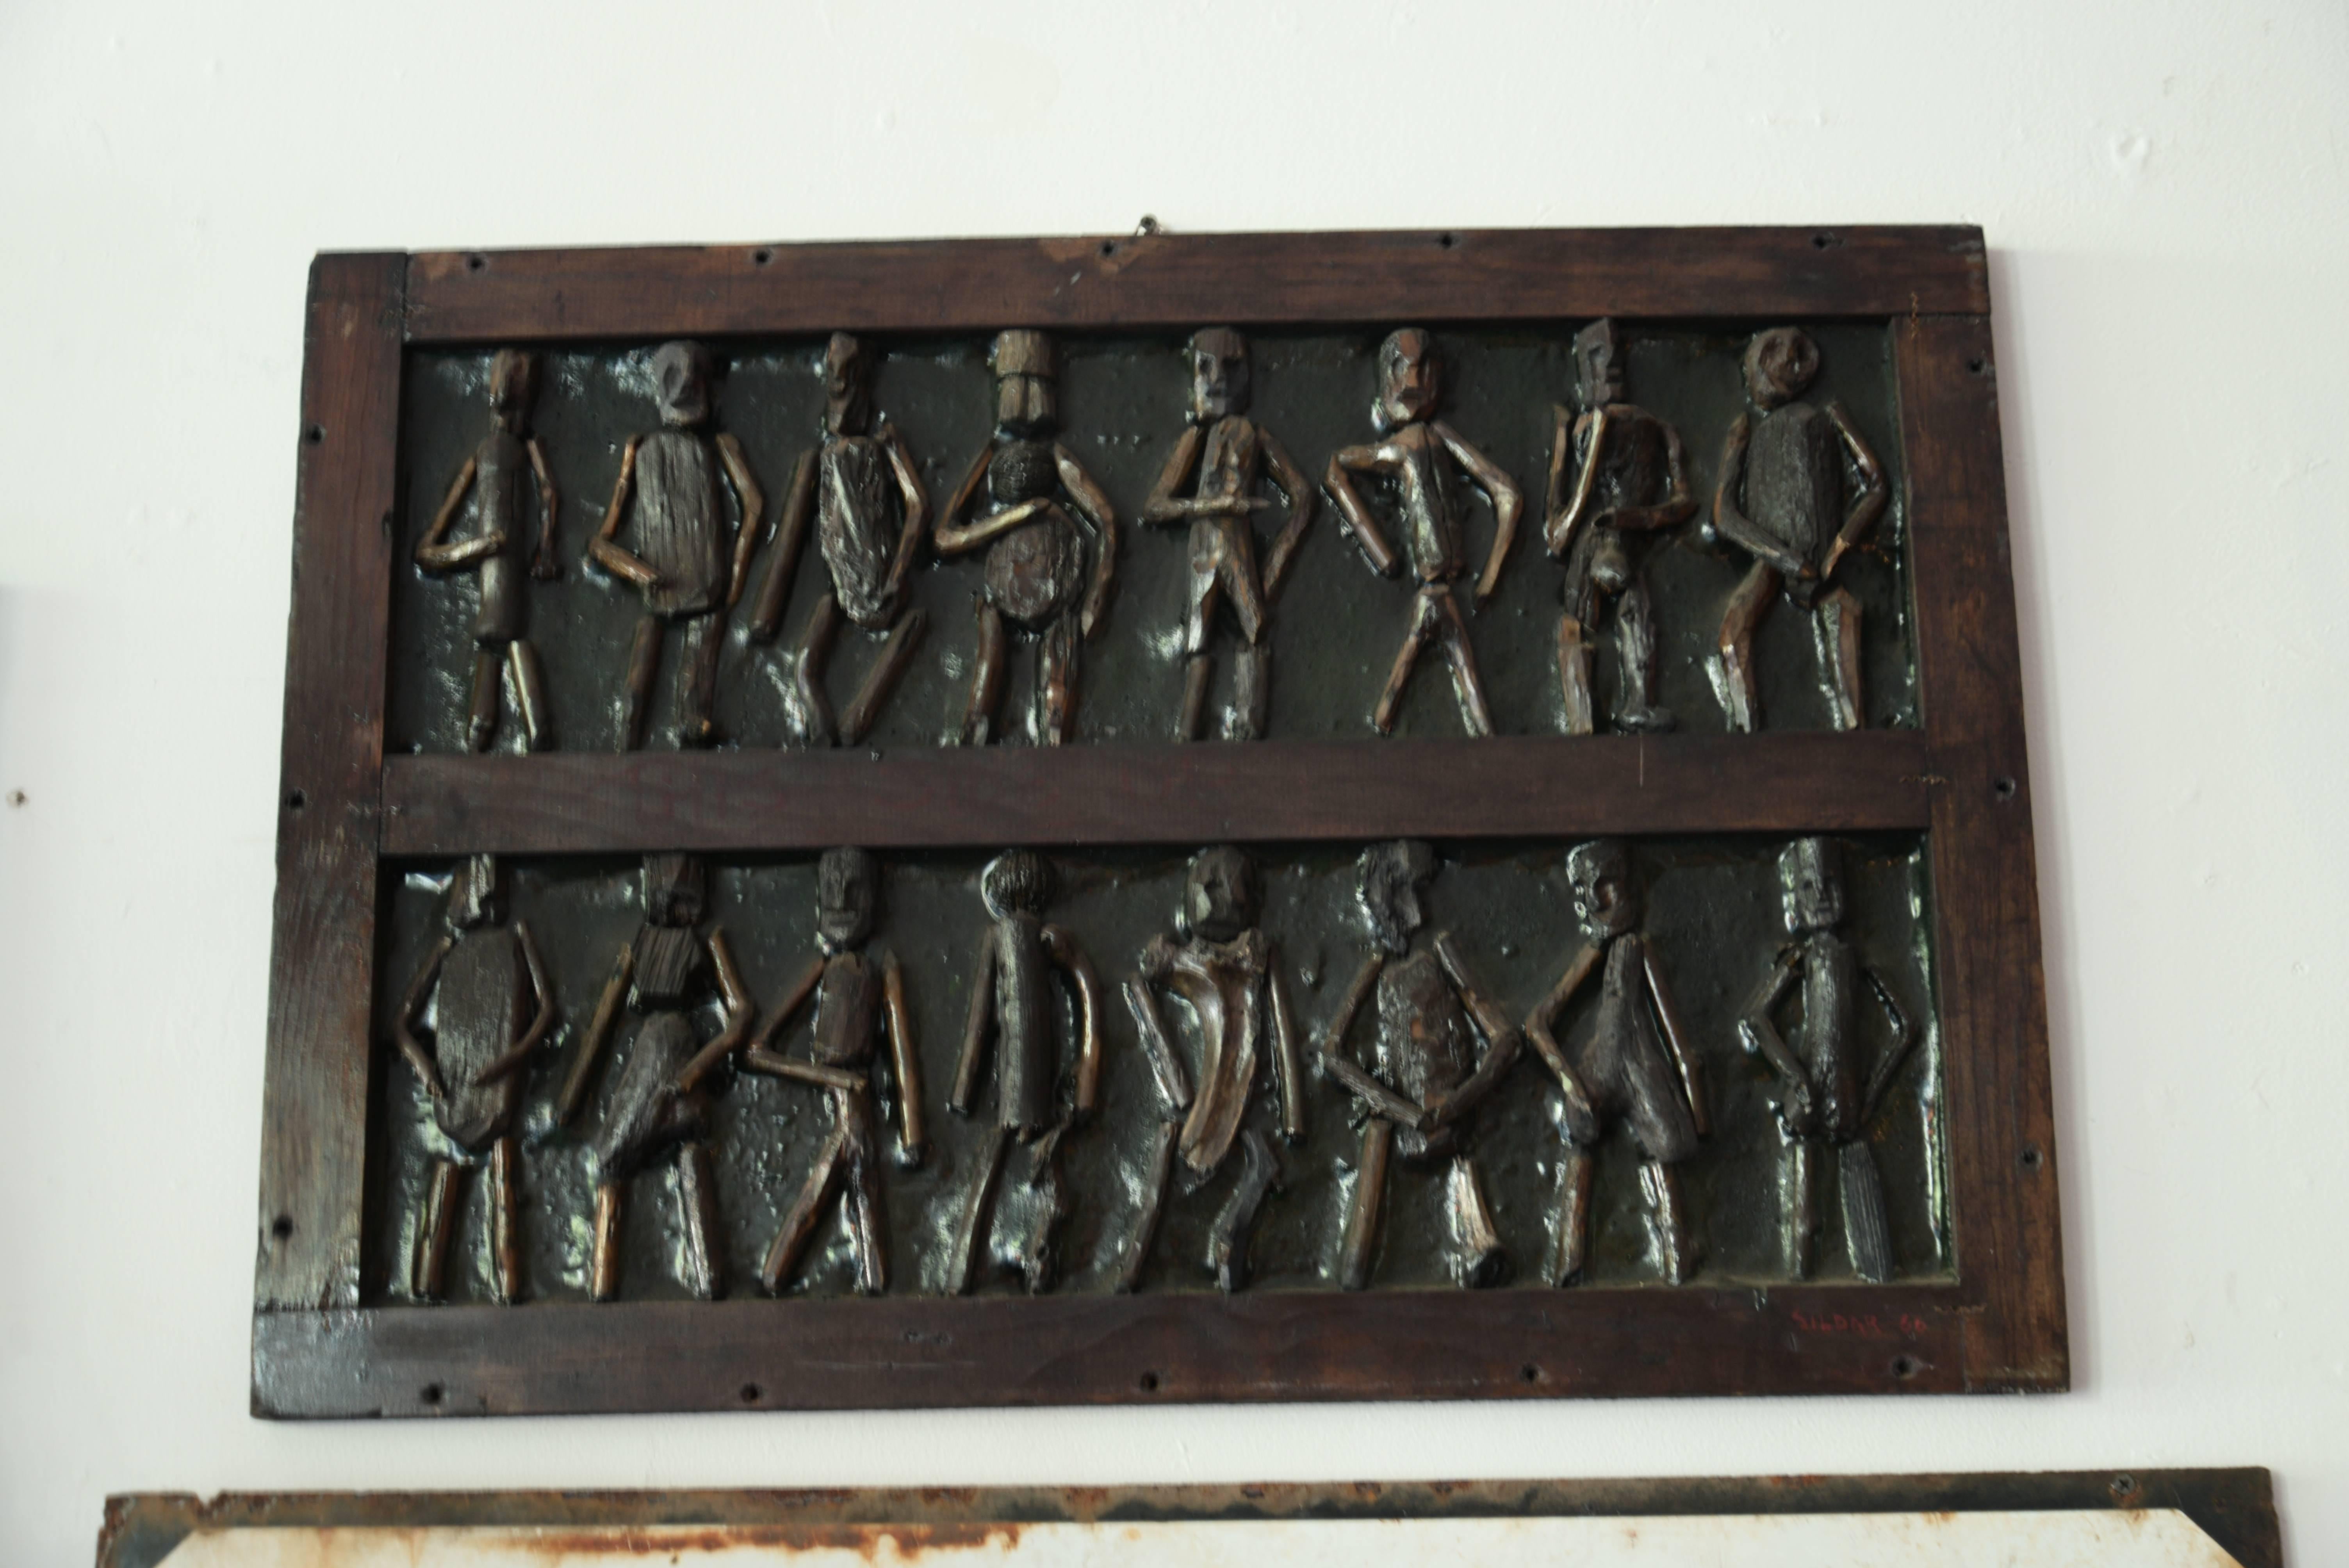 Hand-carved wooden figures inset into a shipping crate.